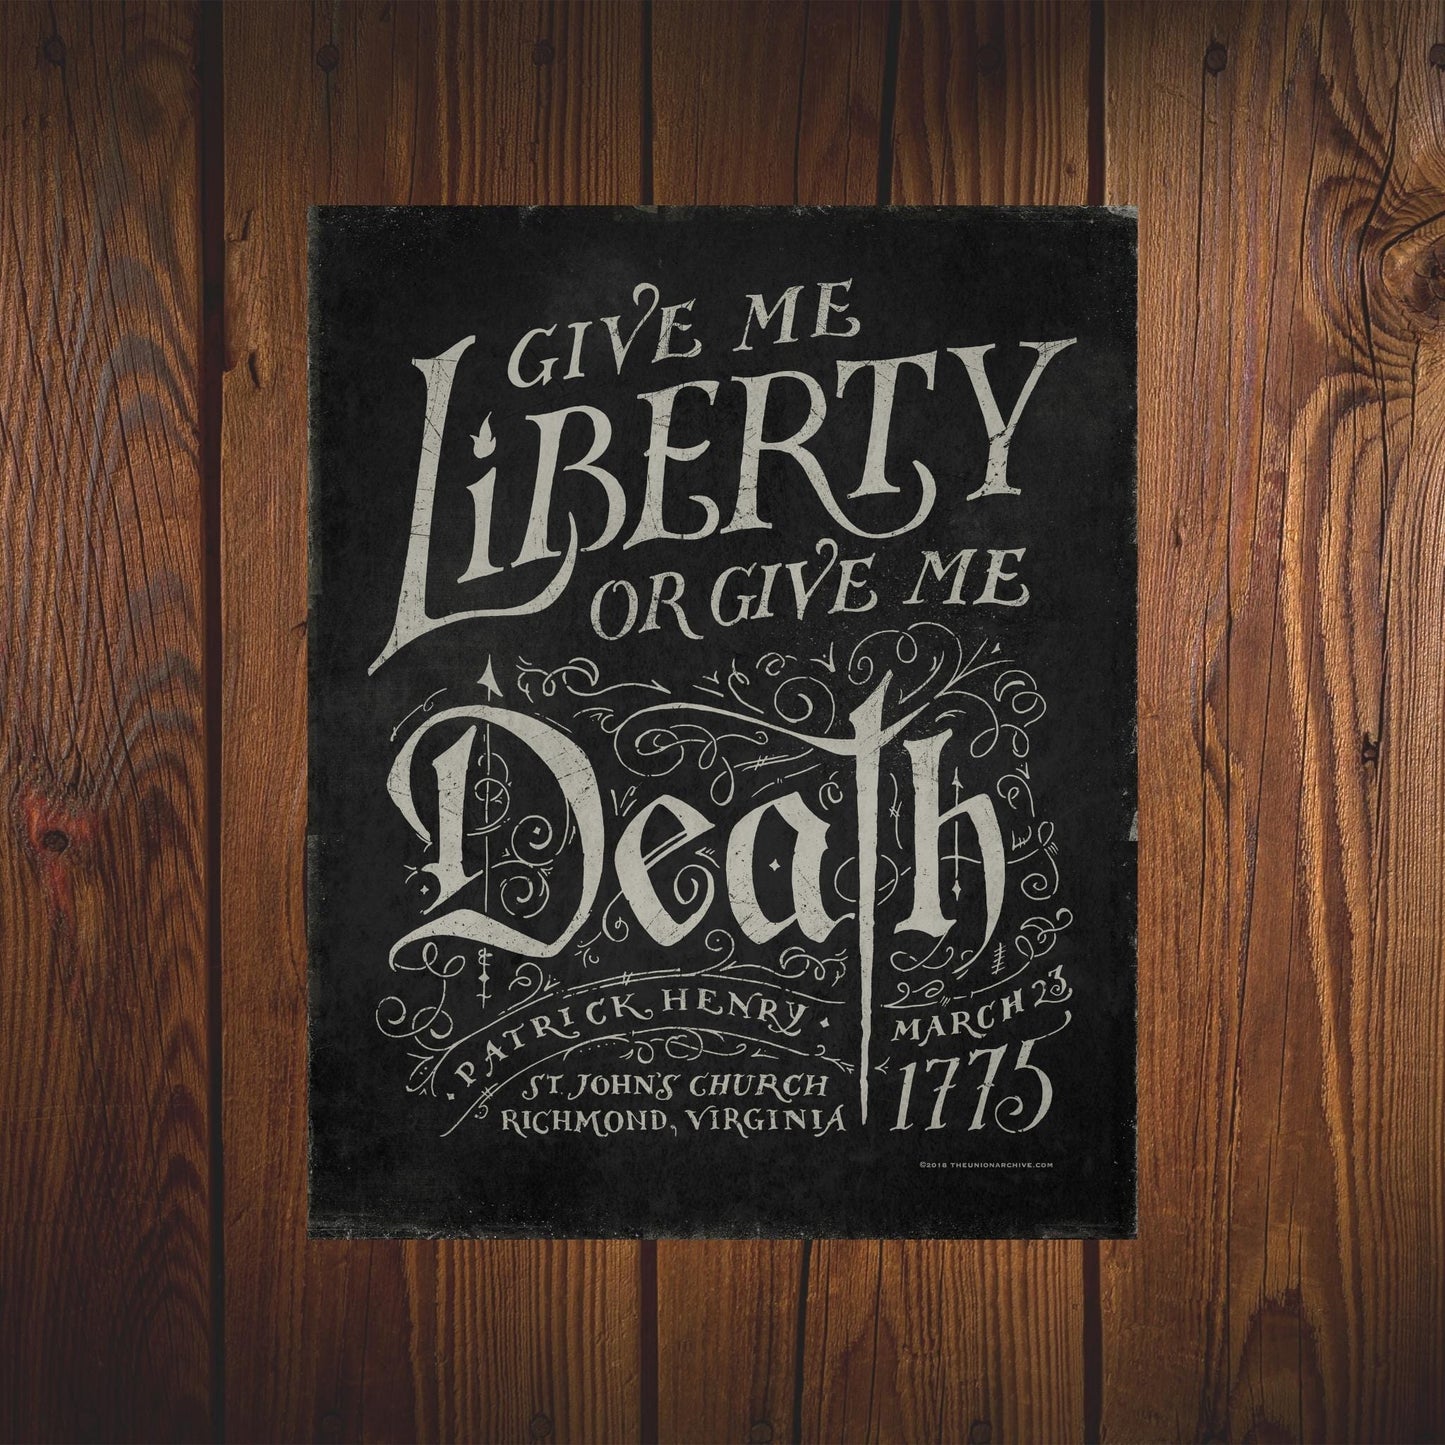 "Give me liberty, or give me death!" Sticker from the history list store